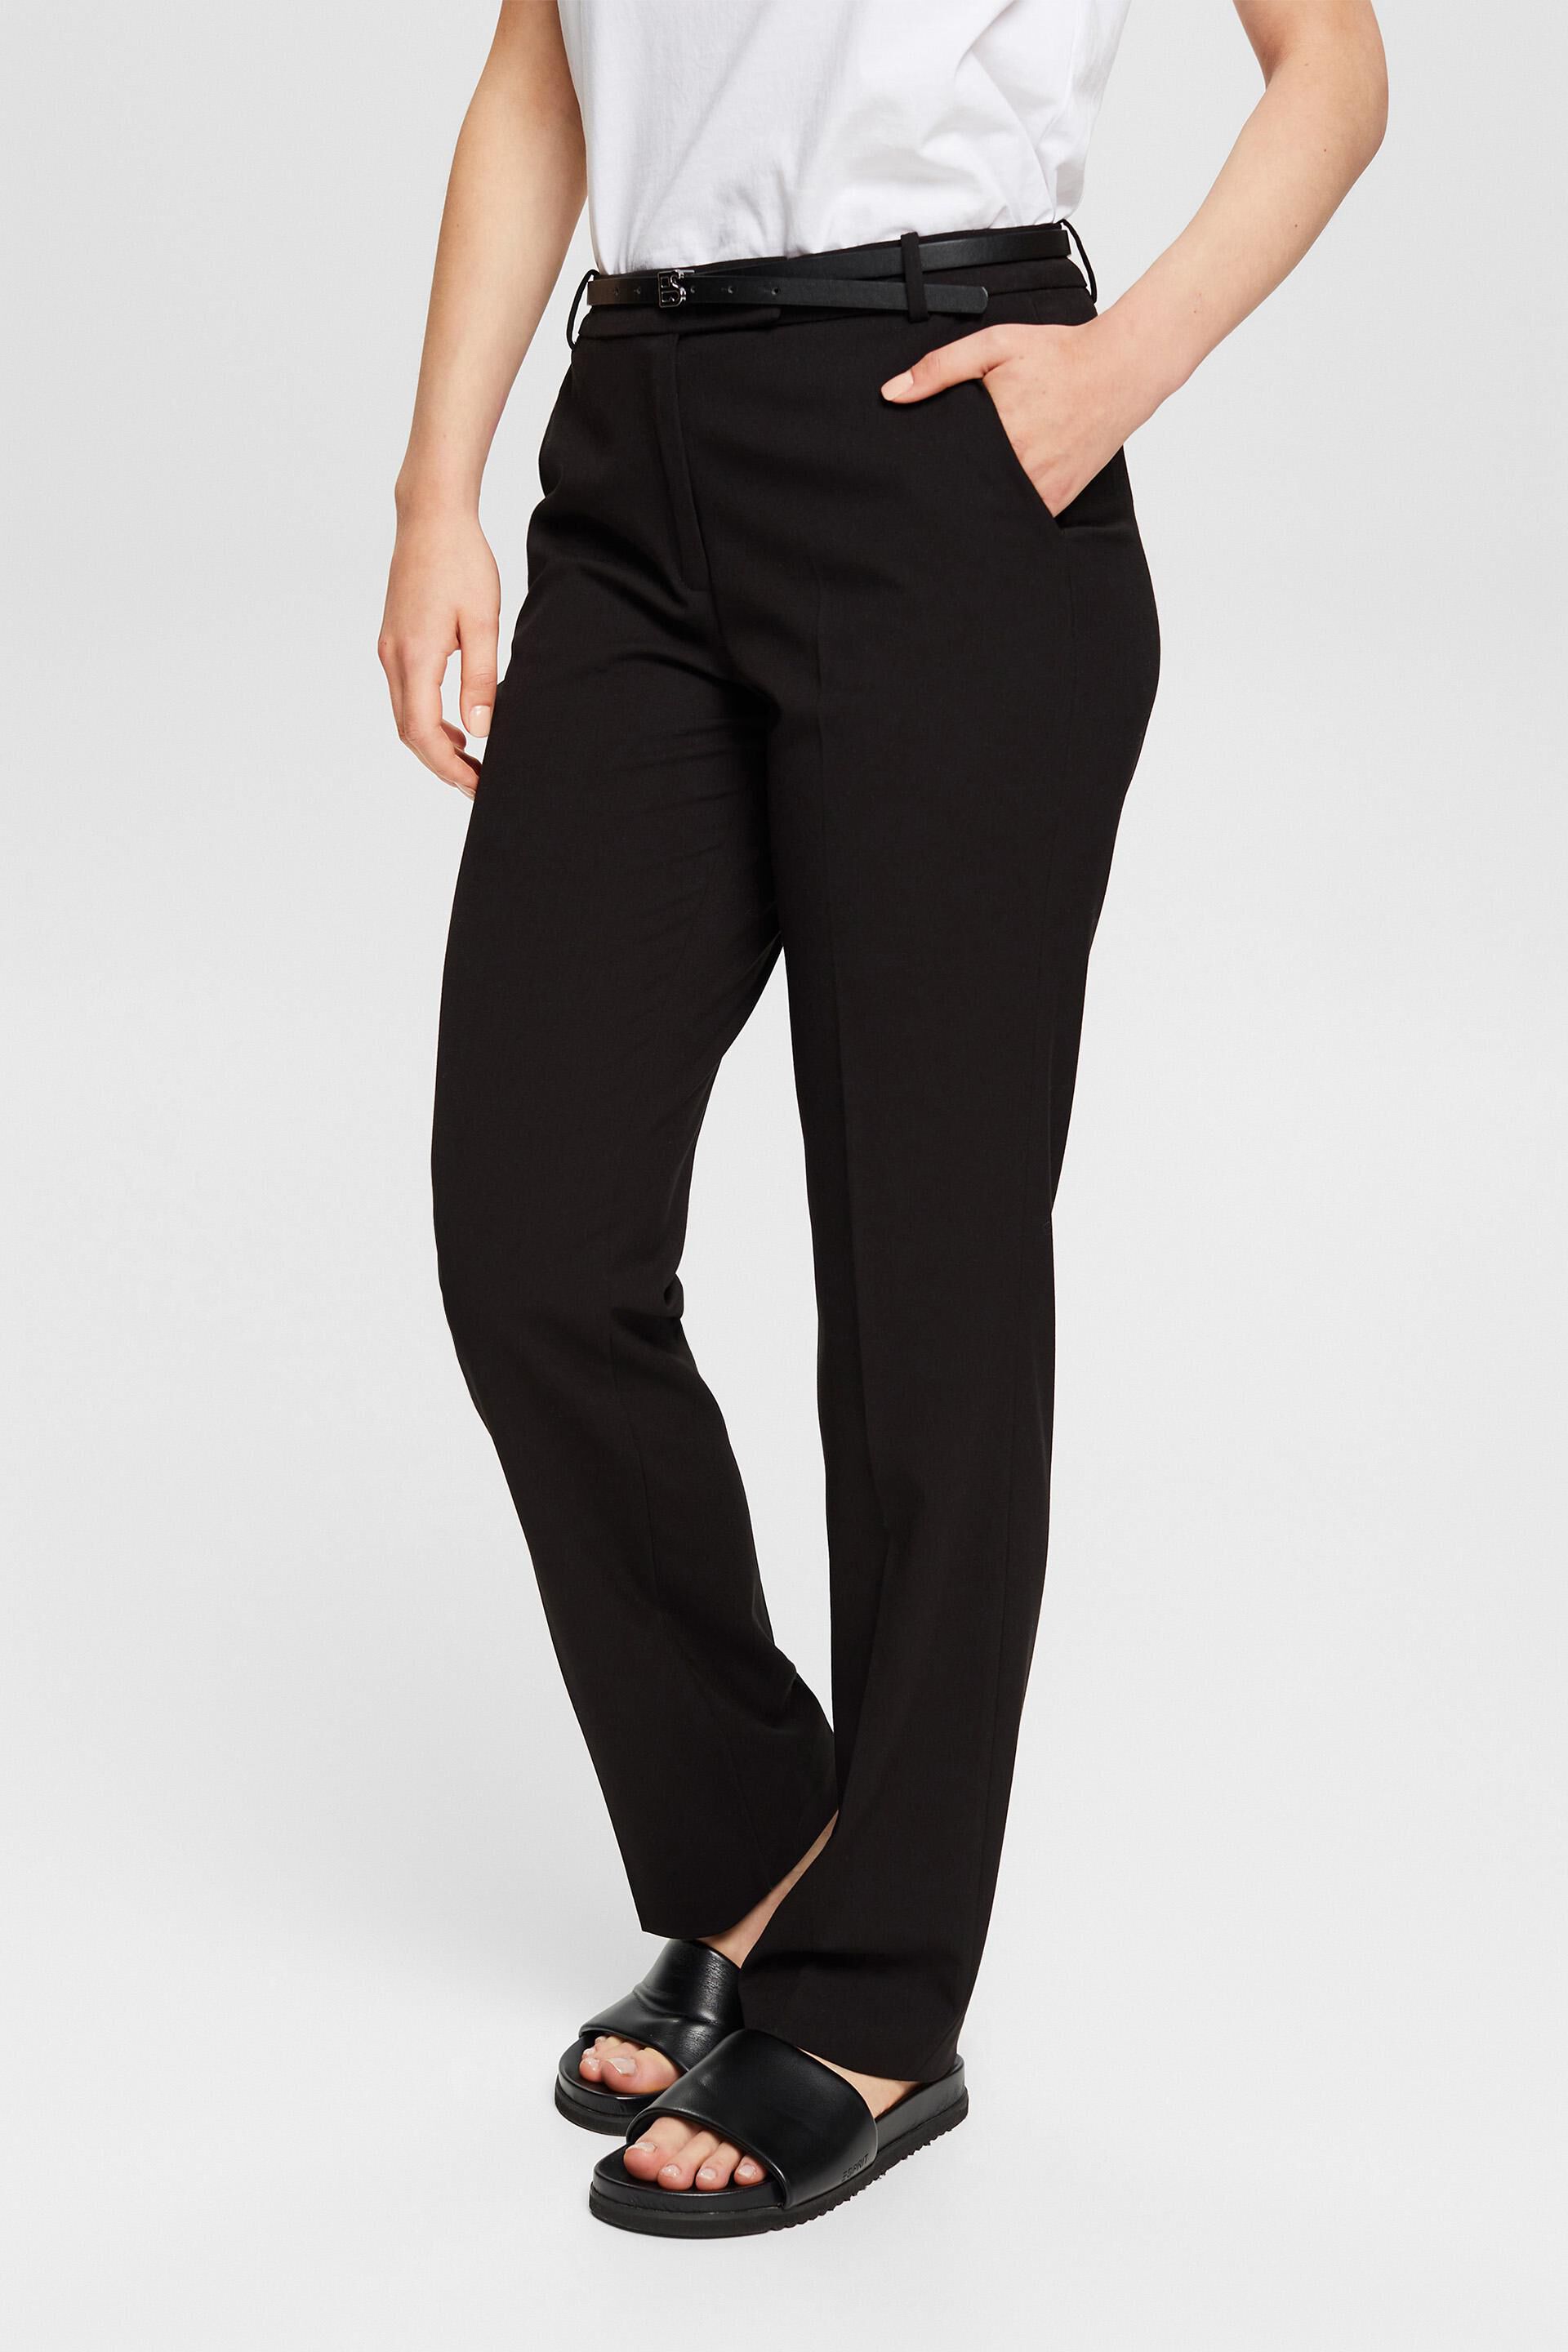 PURE BUSINESS mix & match trousers